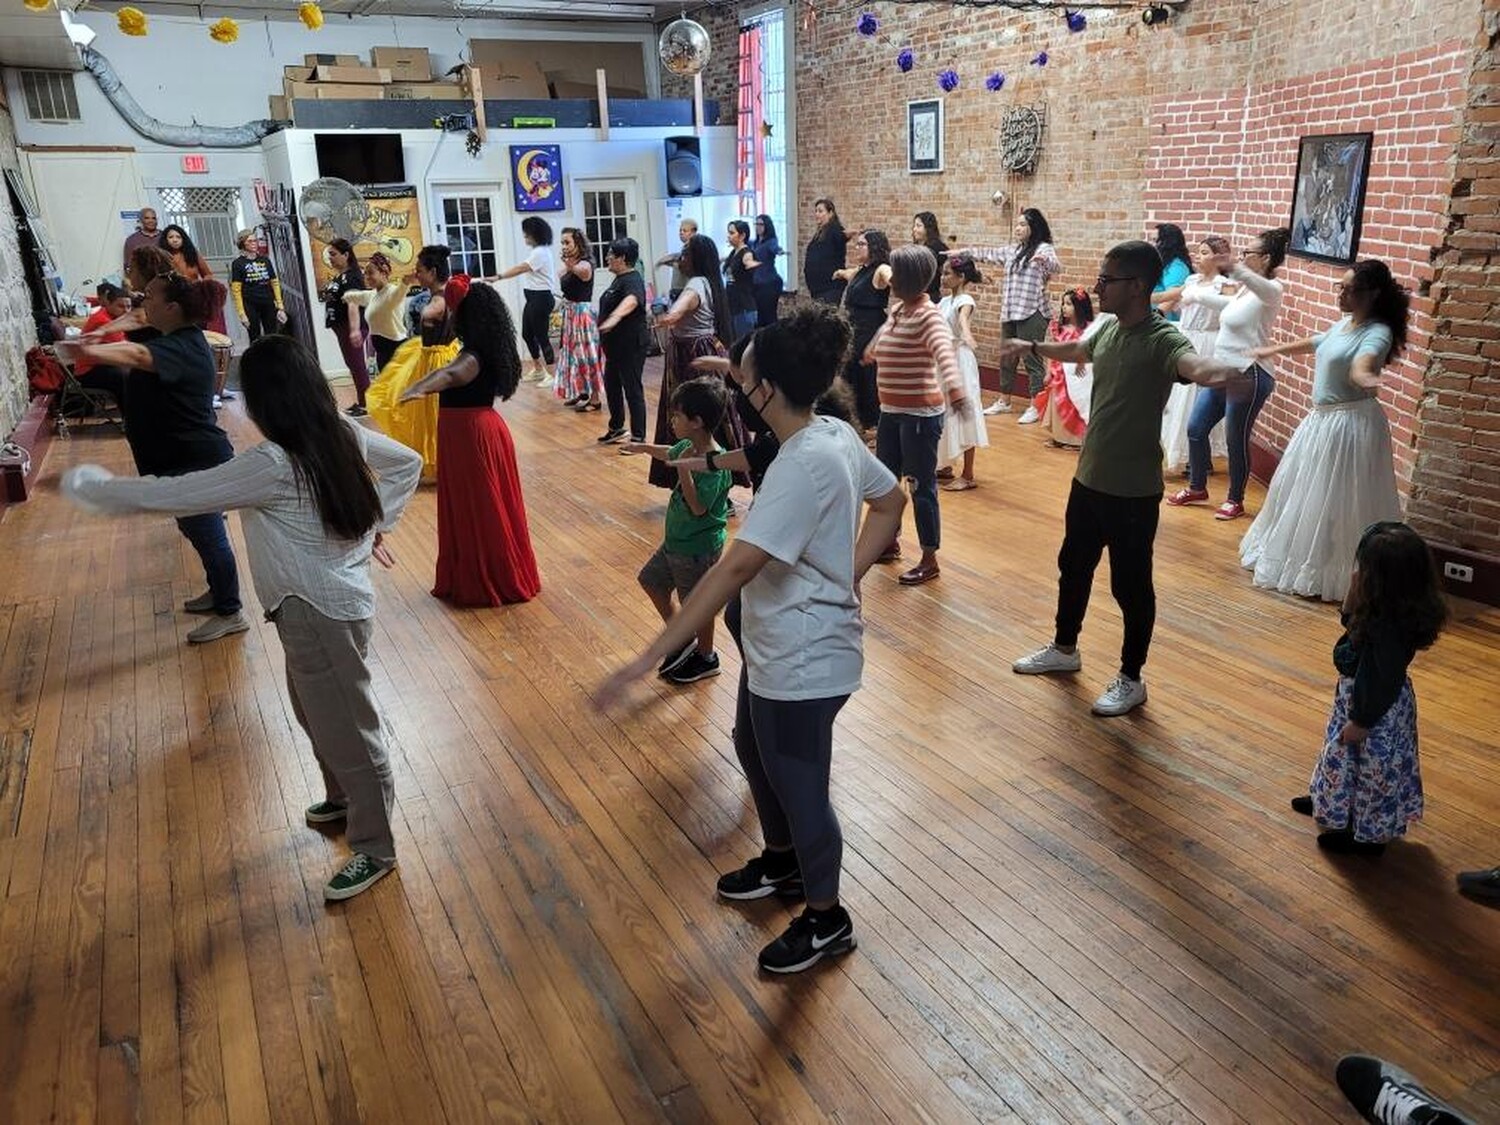 With support from Virginia Folklife, Semilla Cultural hosted a free community workshop led by Tata and her team of dancers in October 2022.